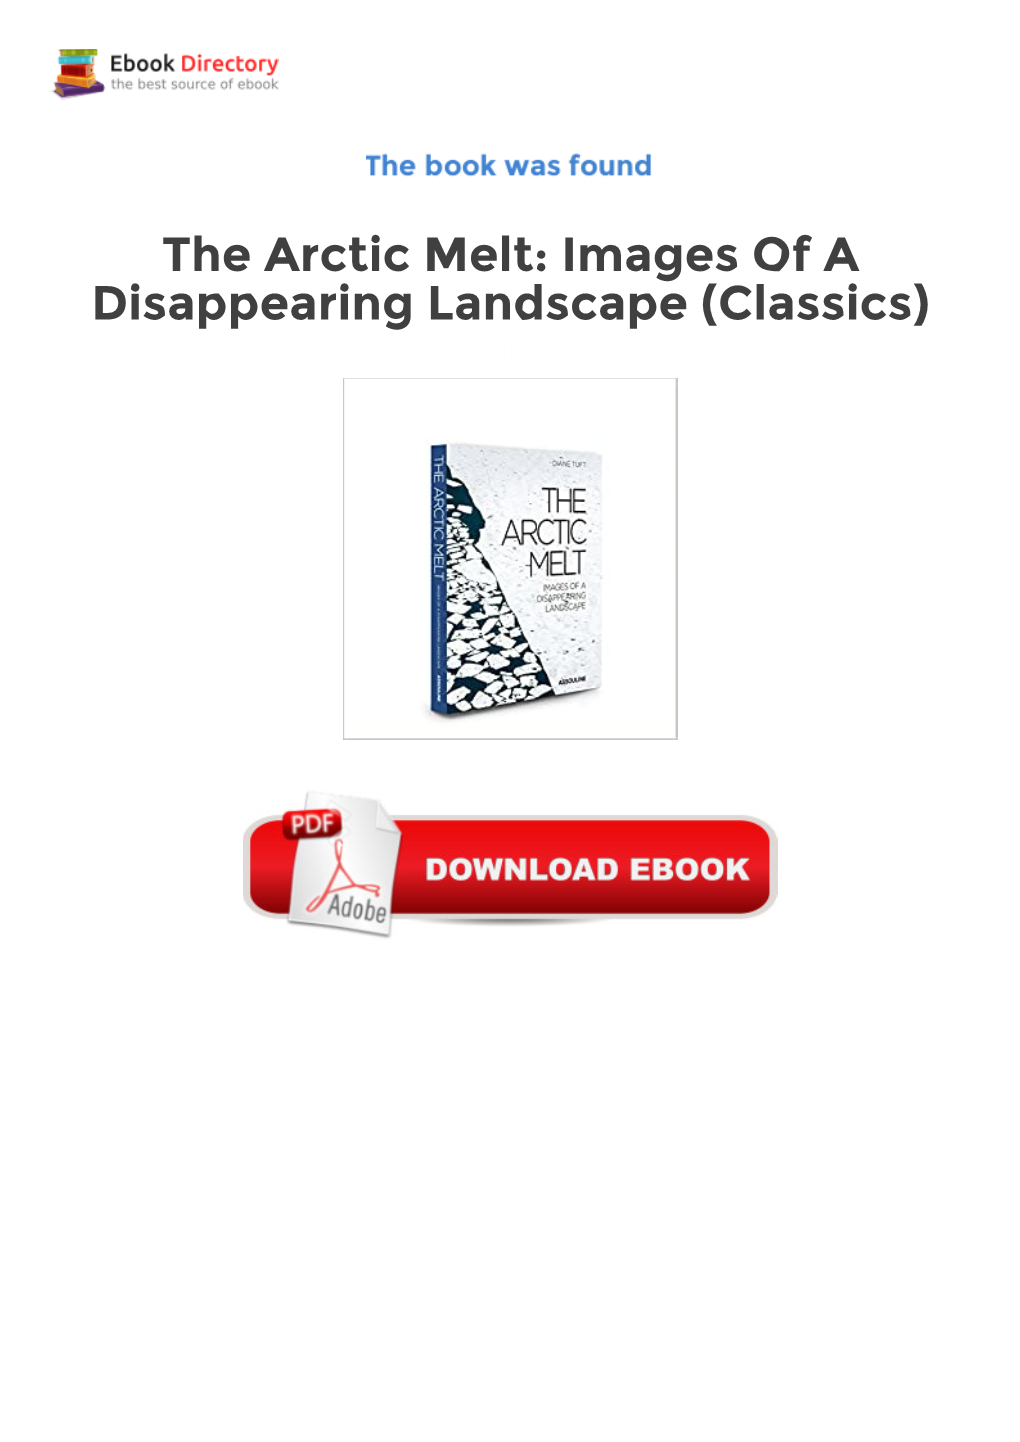 The Arctic Melt: Images of a Disappearing Landscape (Classics)